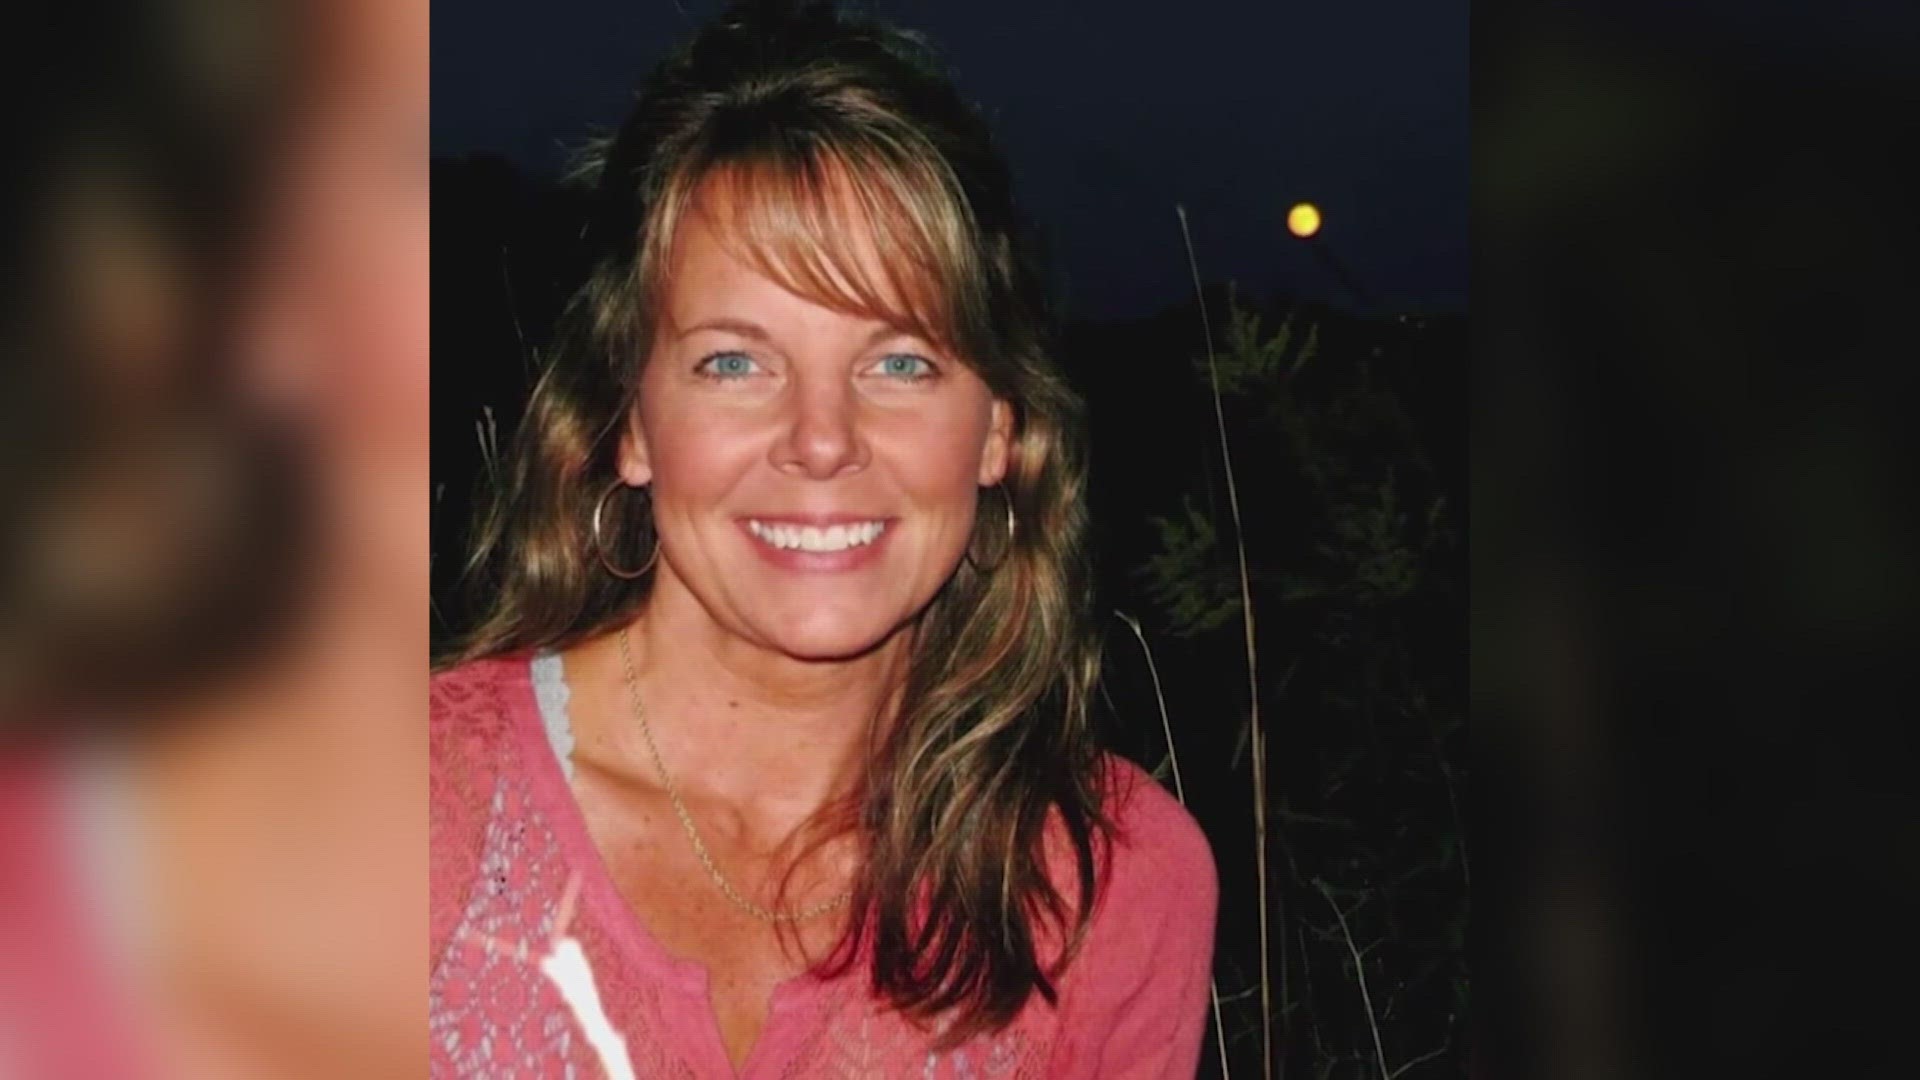 Morphew, 49, went missing in May 2020 from her home near Salida.